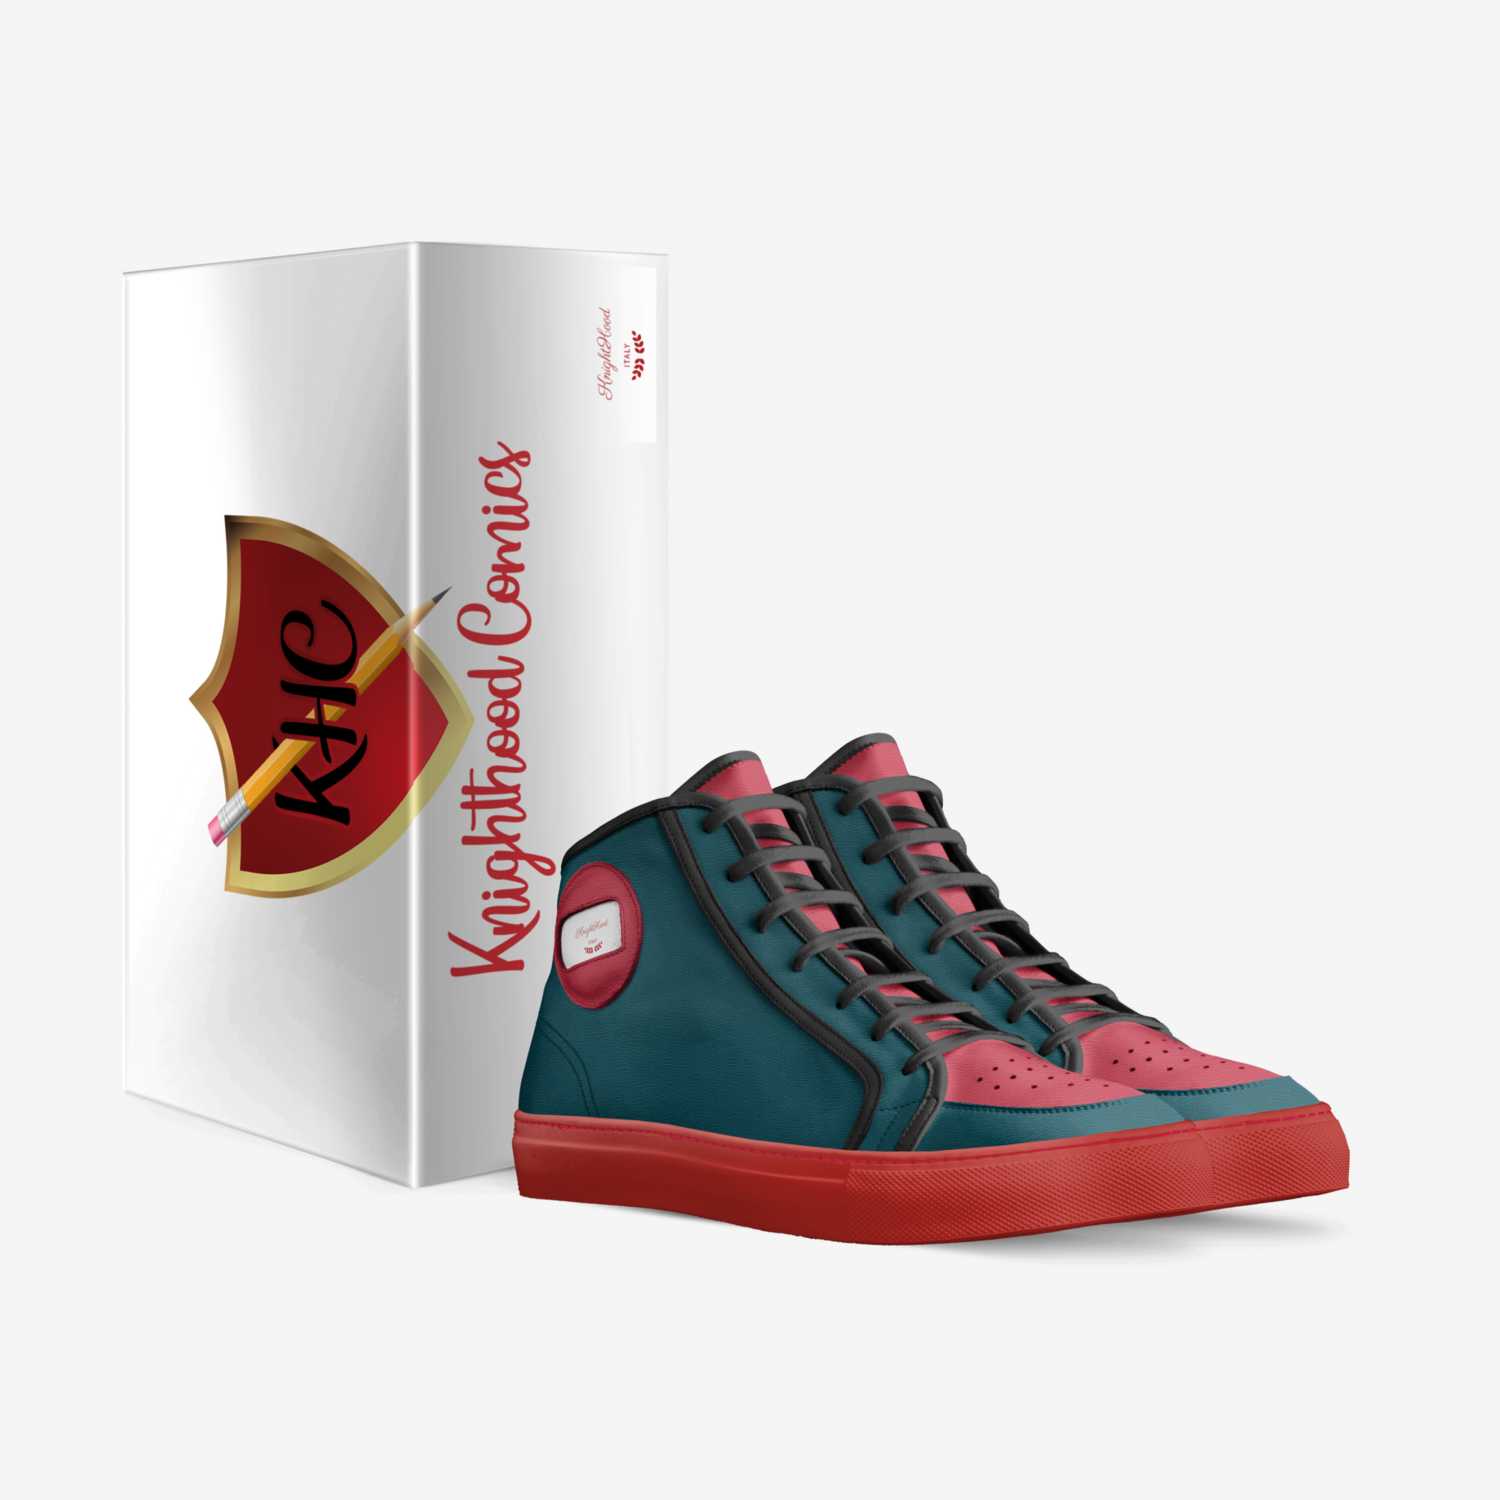 KnightHood custom made in Italy shoes by Terry Cook Jr | Box view